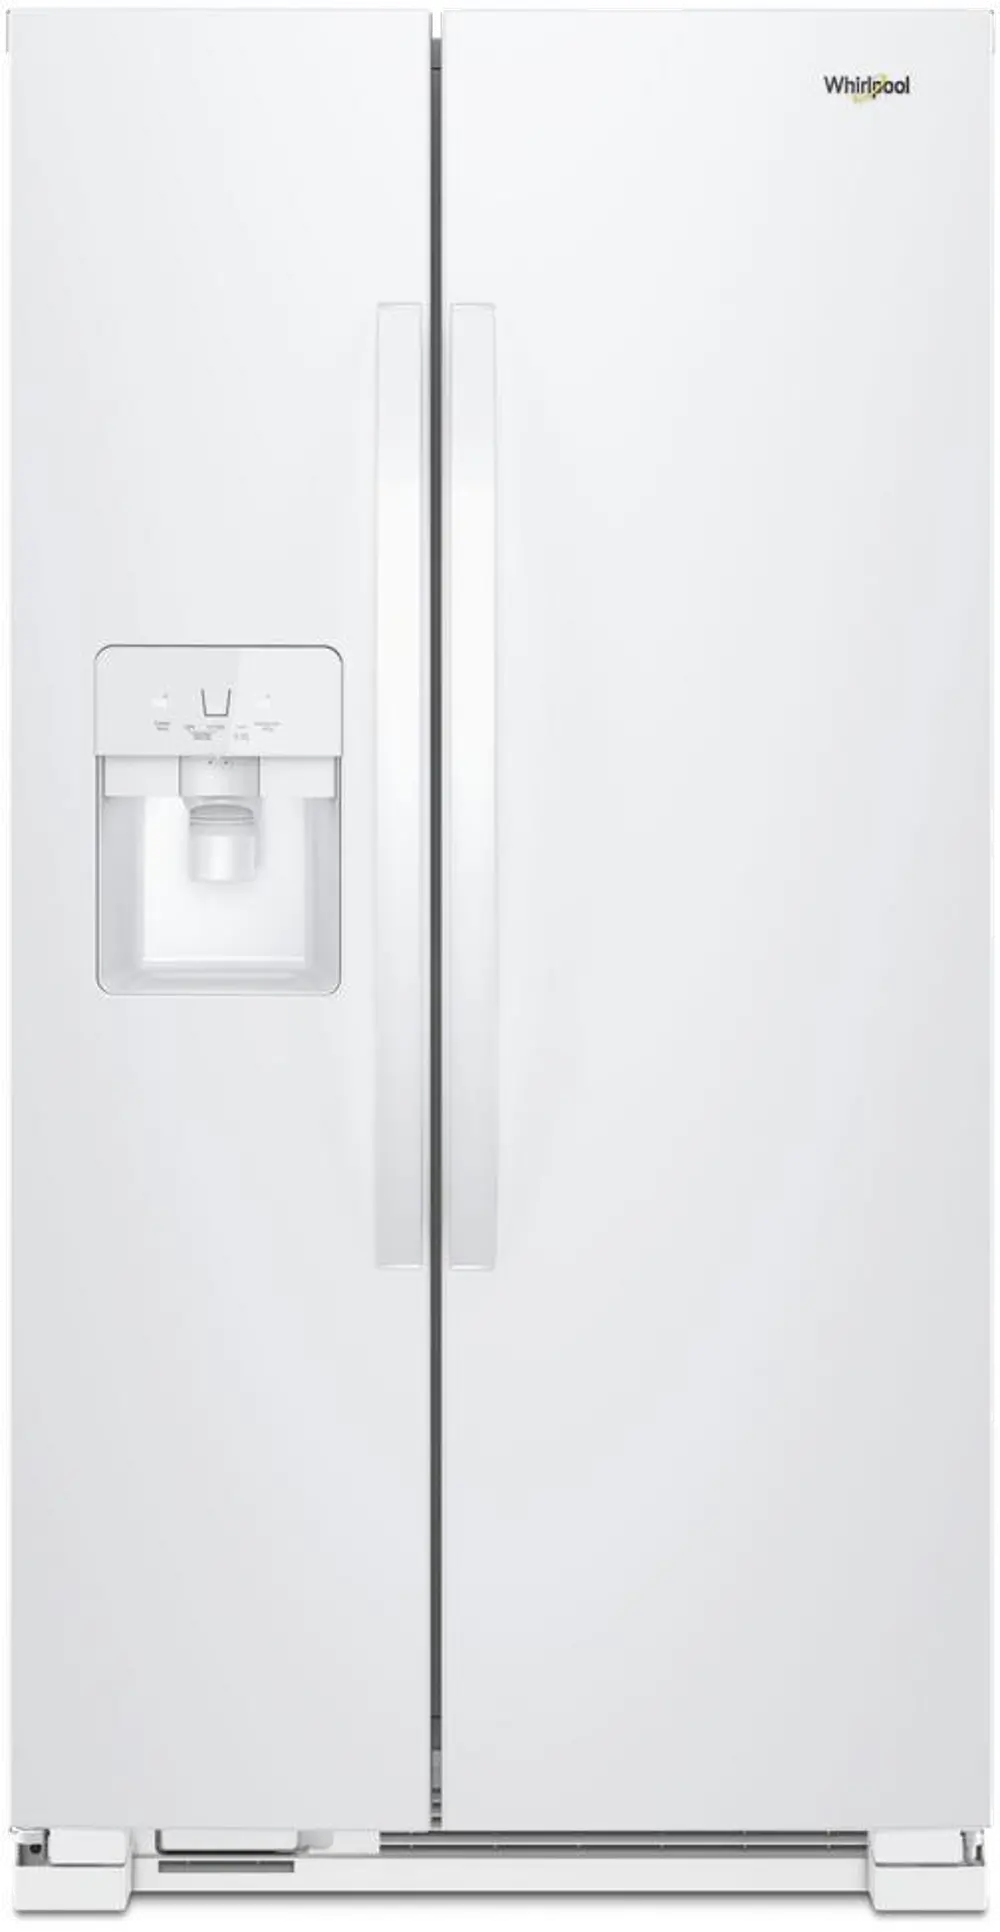 WRS321SDHW Whirlpool 21.4 cu ft Side by Side Refrigerator - 33 W White-1